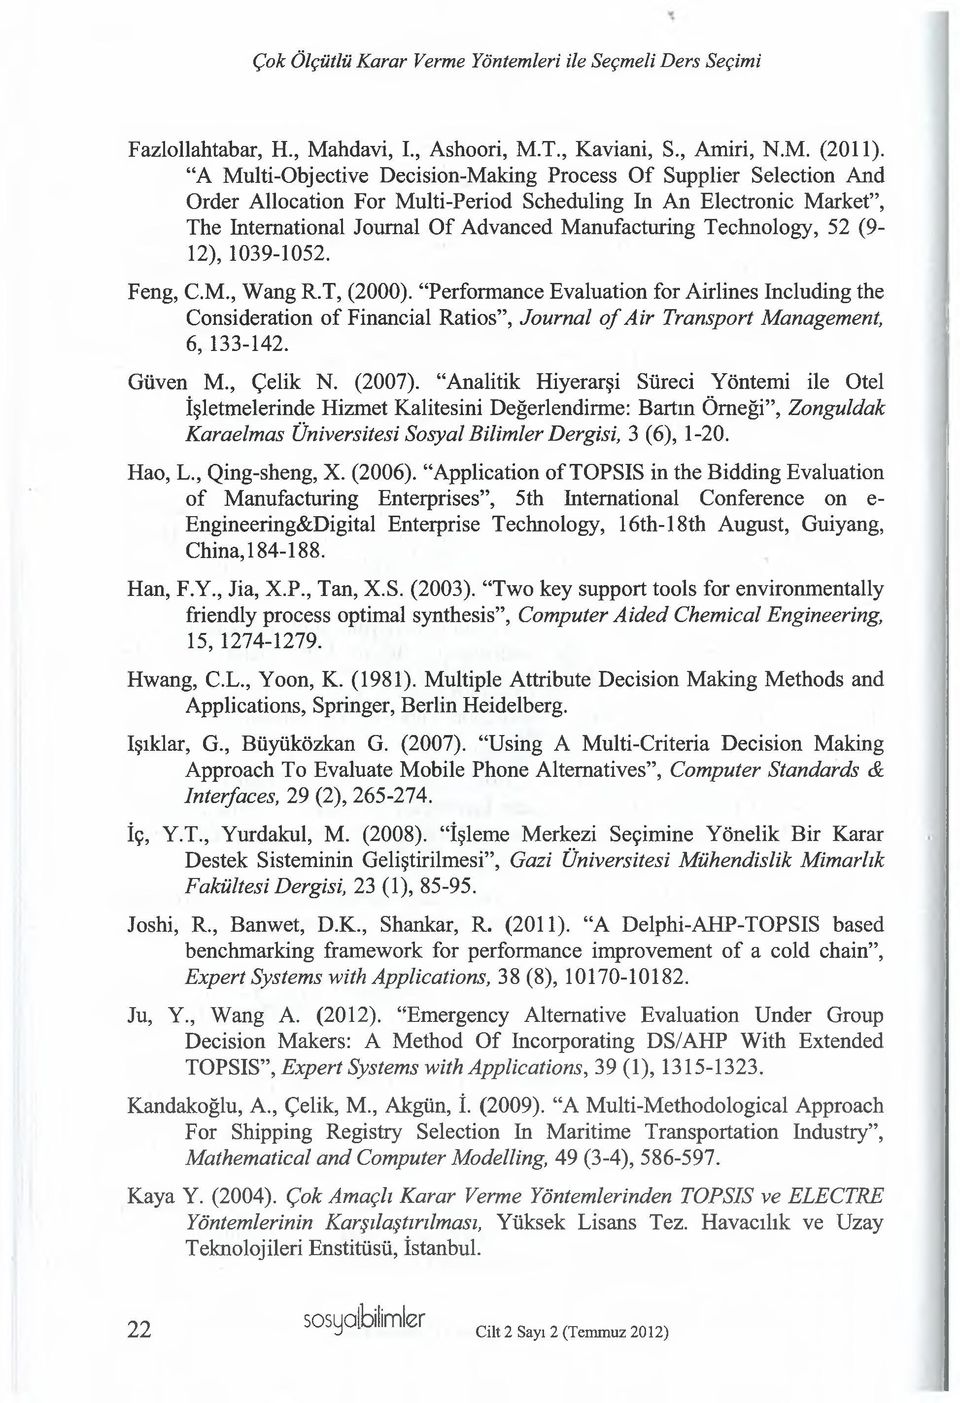 Technology, 52 (9-12), 1039-1052. Feng, C.M., Wang R.T, (2000). Performance Evaluation for Airlines Including the Consideration of Financial Ratios, Journal o f Air Transport Management, 6, 133-142.